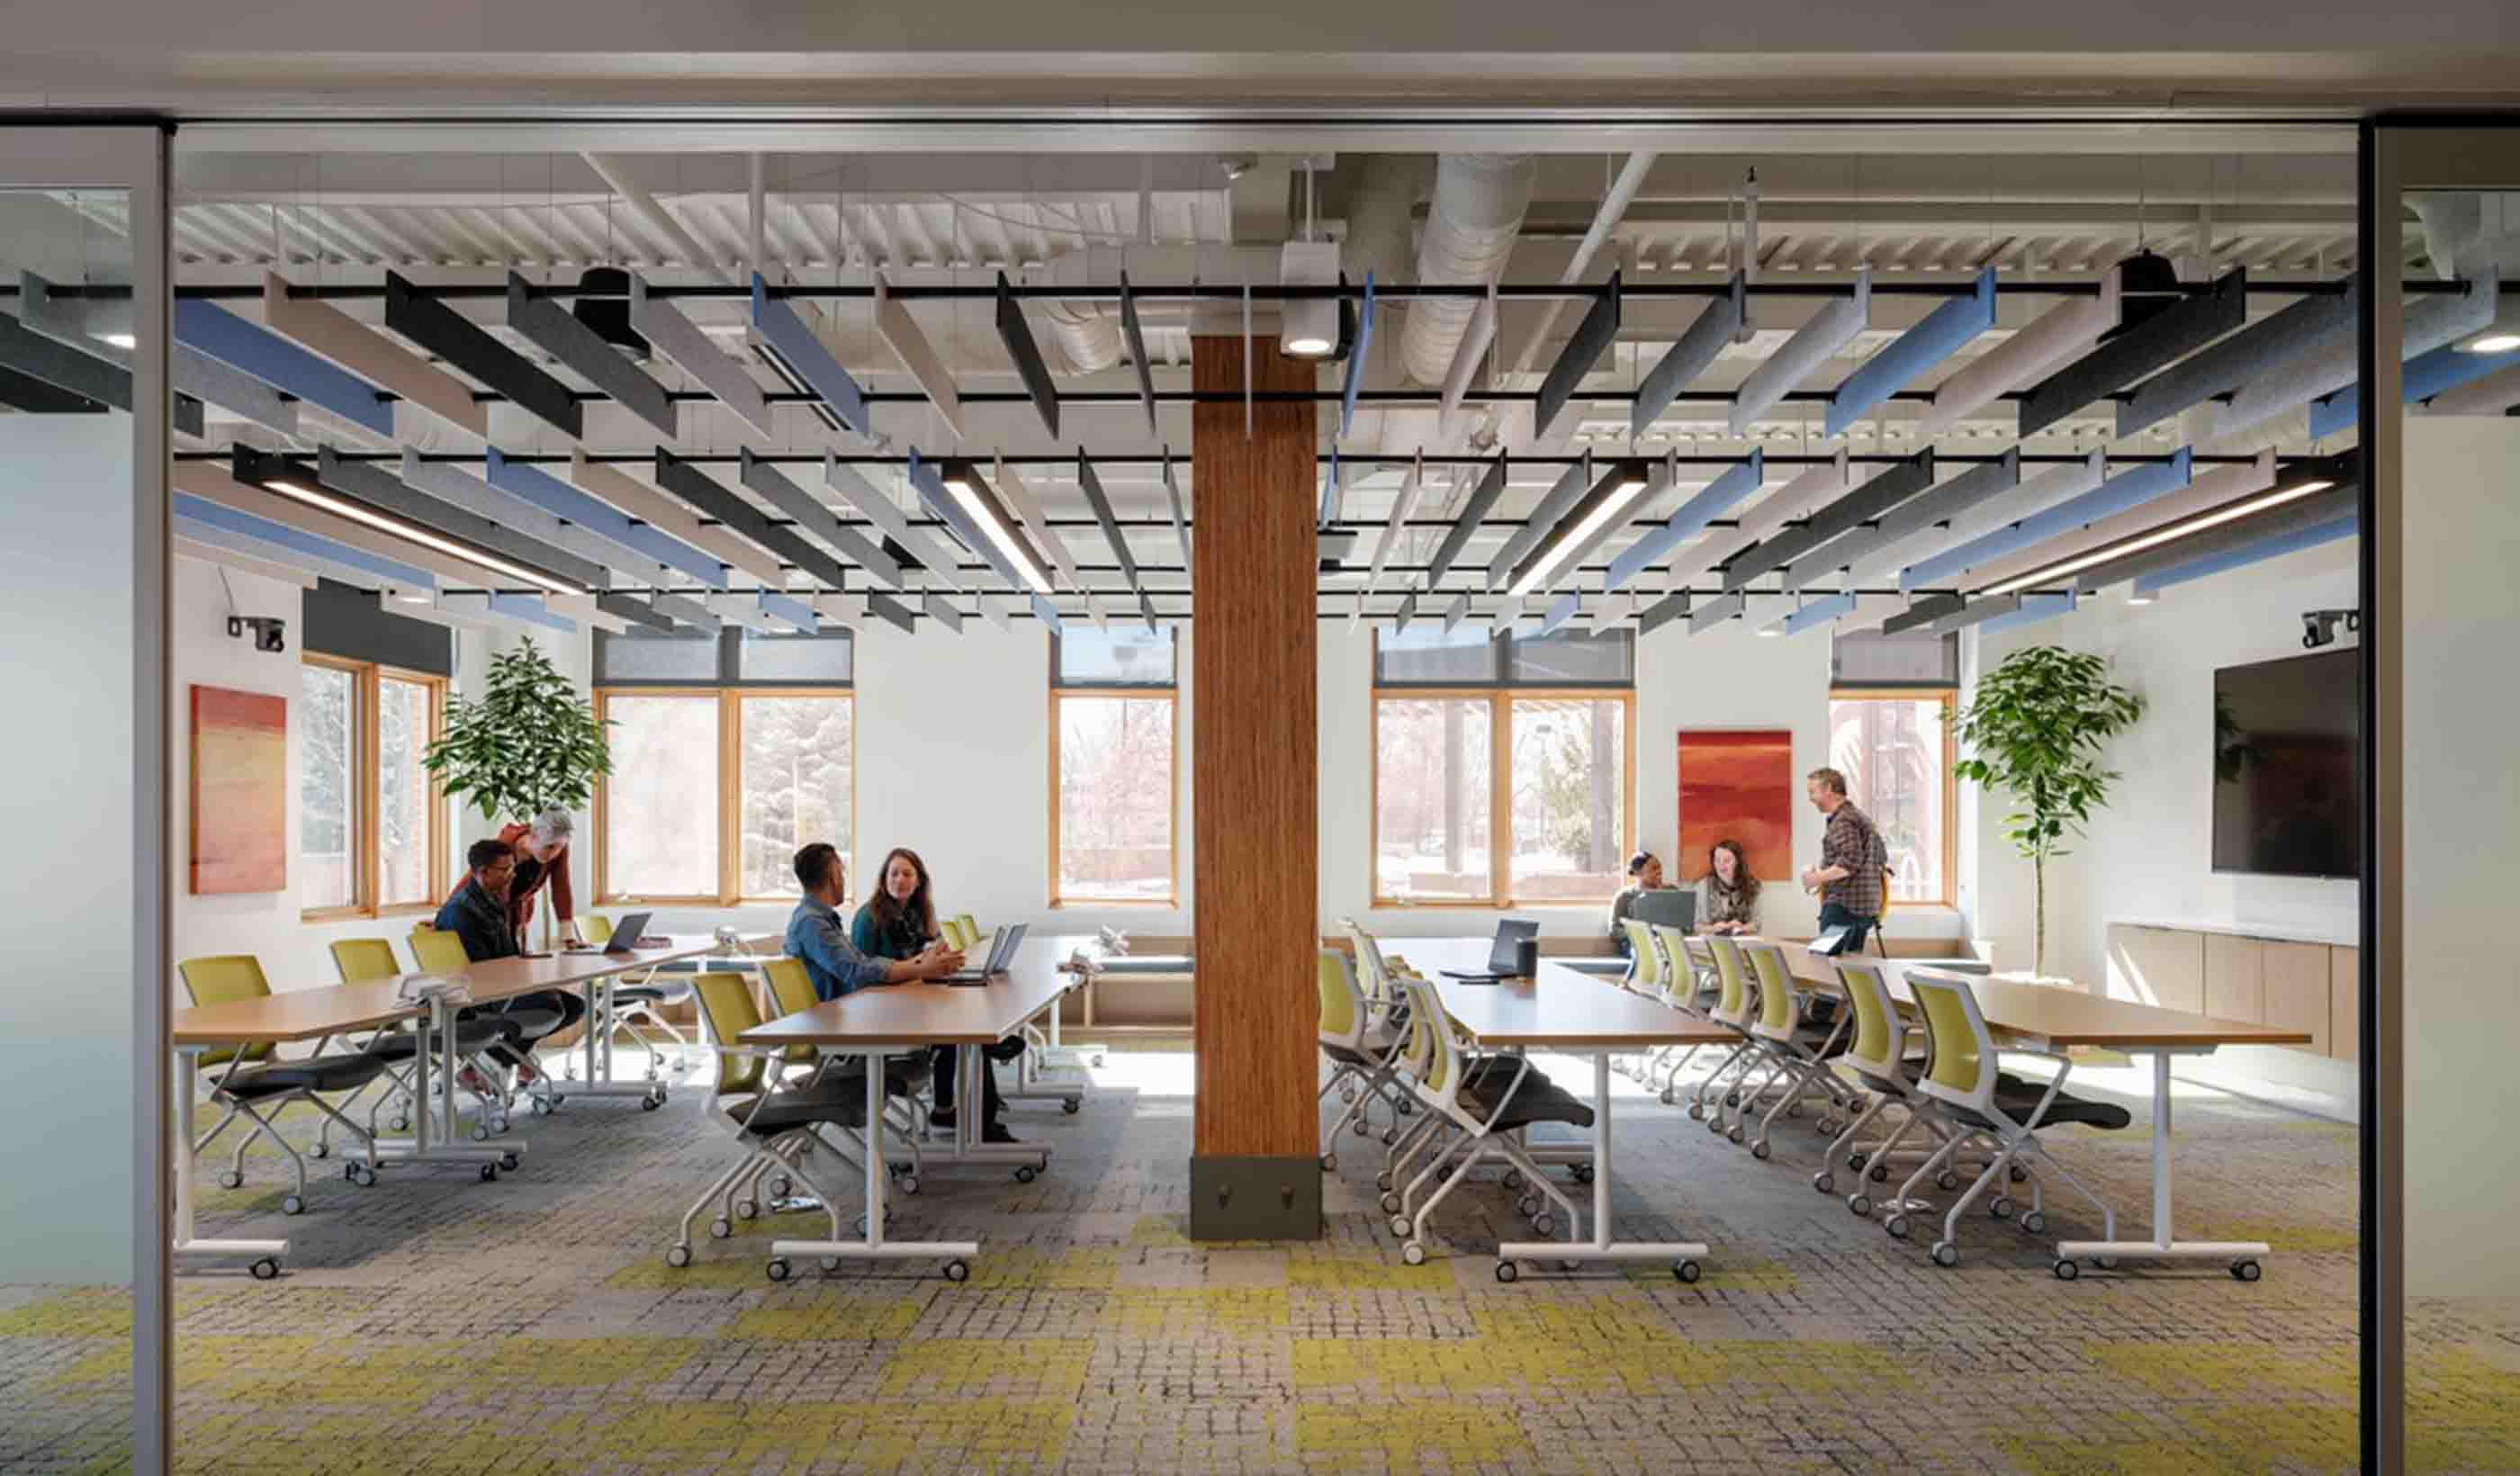 The Nature Conservancy’s New Space by Stantec is Designed with A Colorado Nature Motif